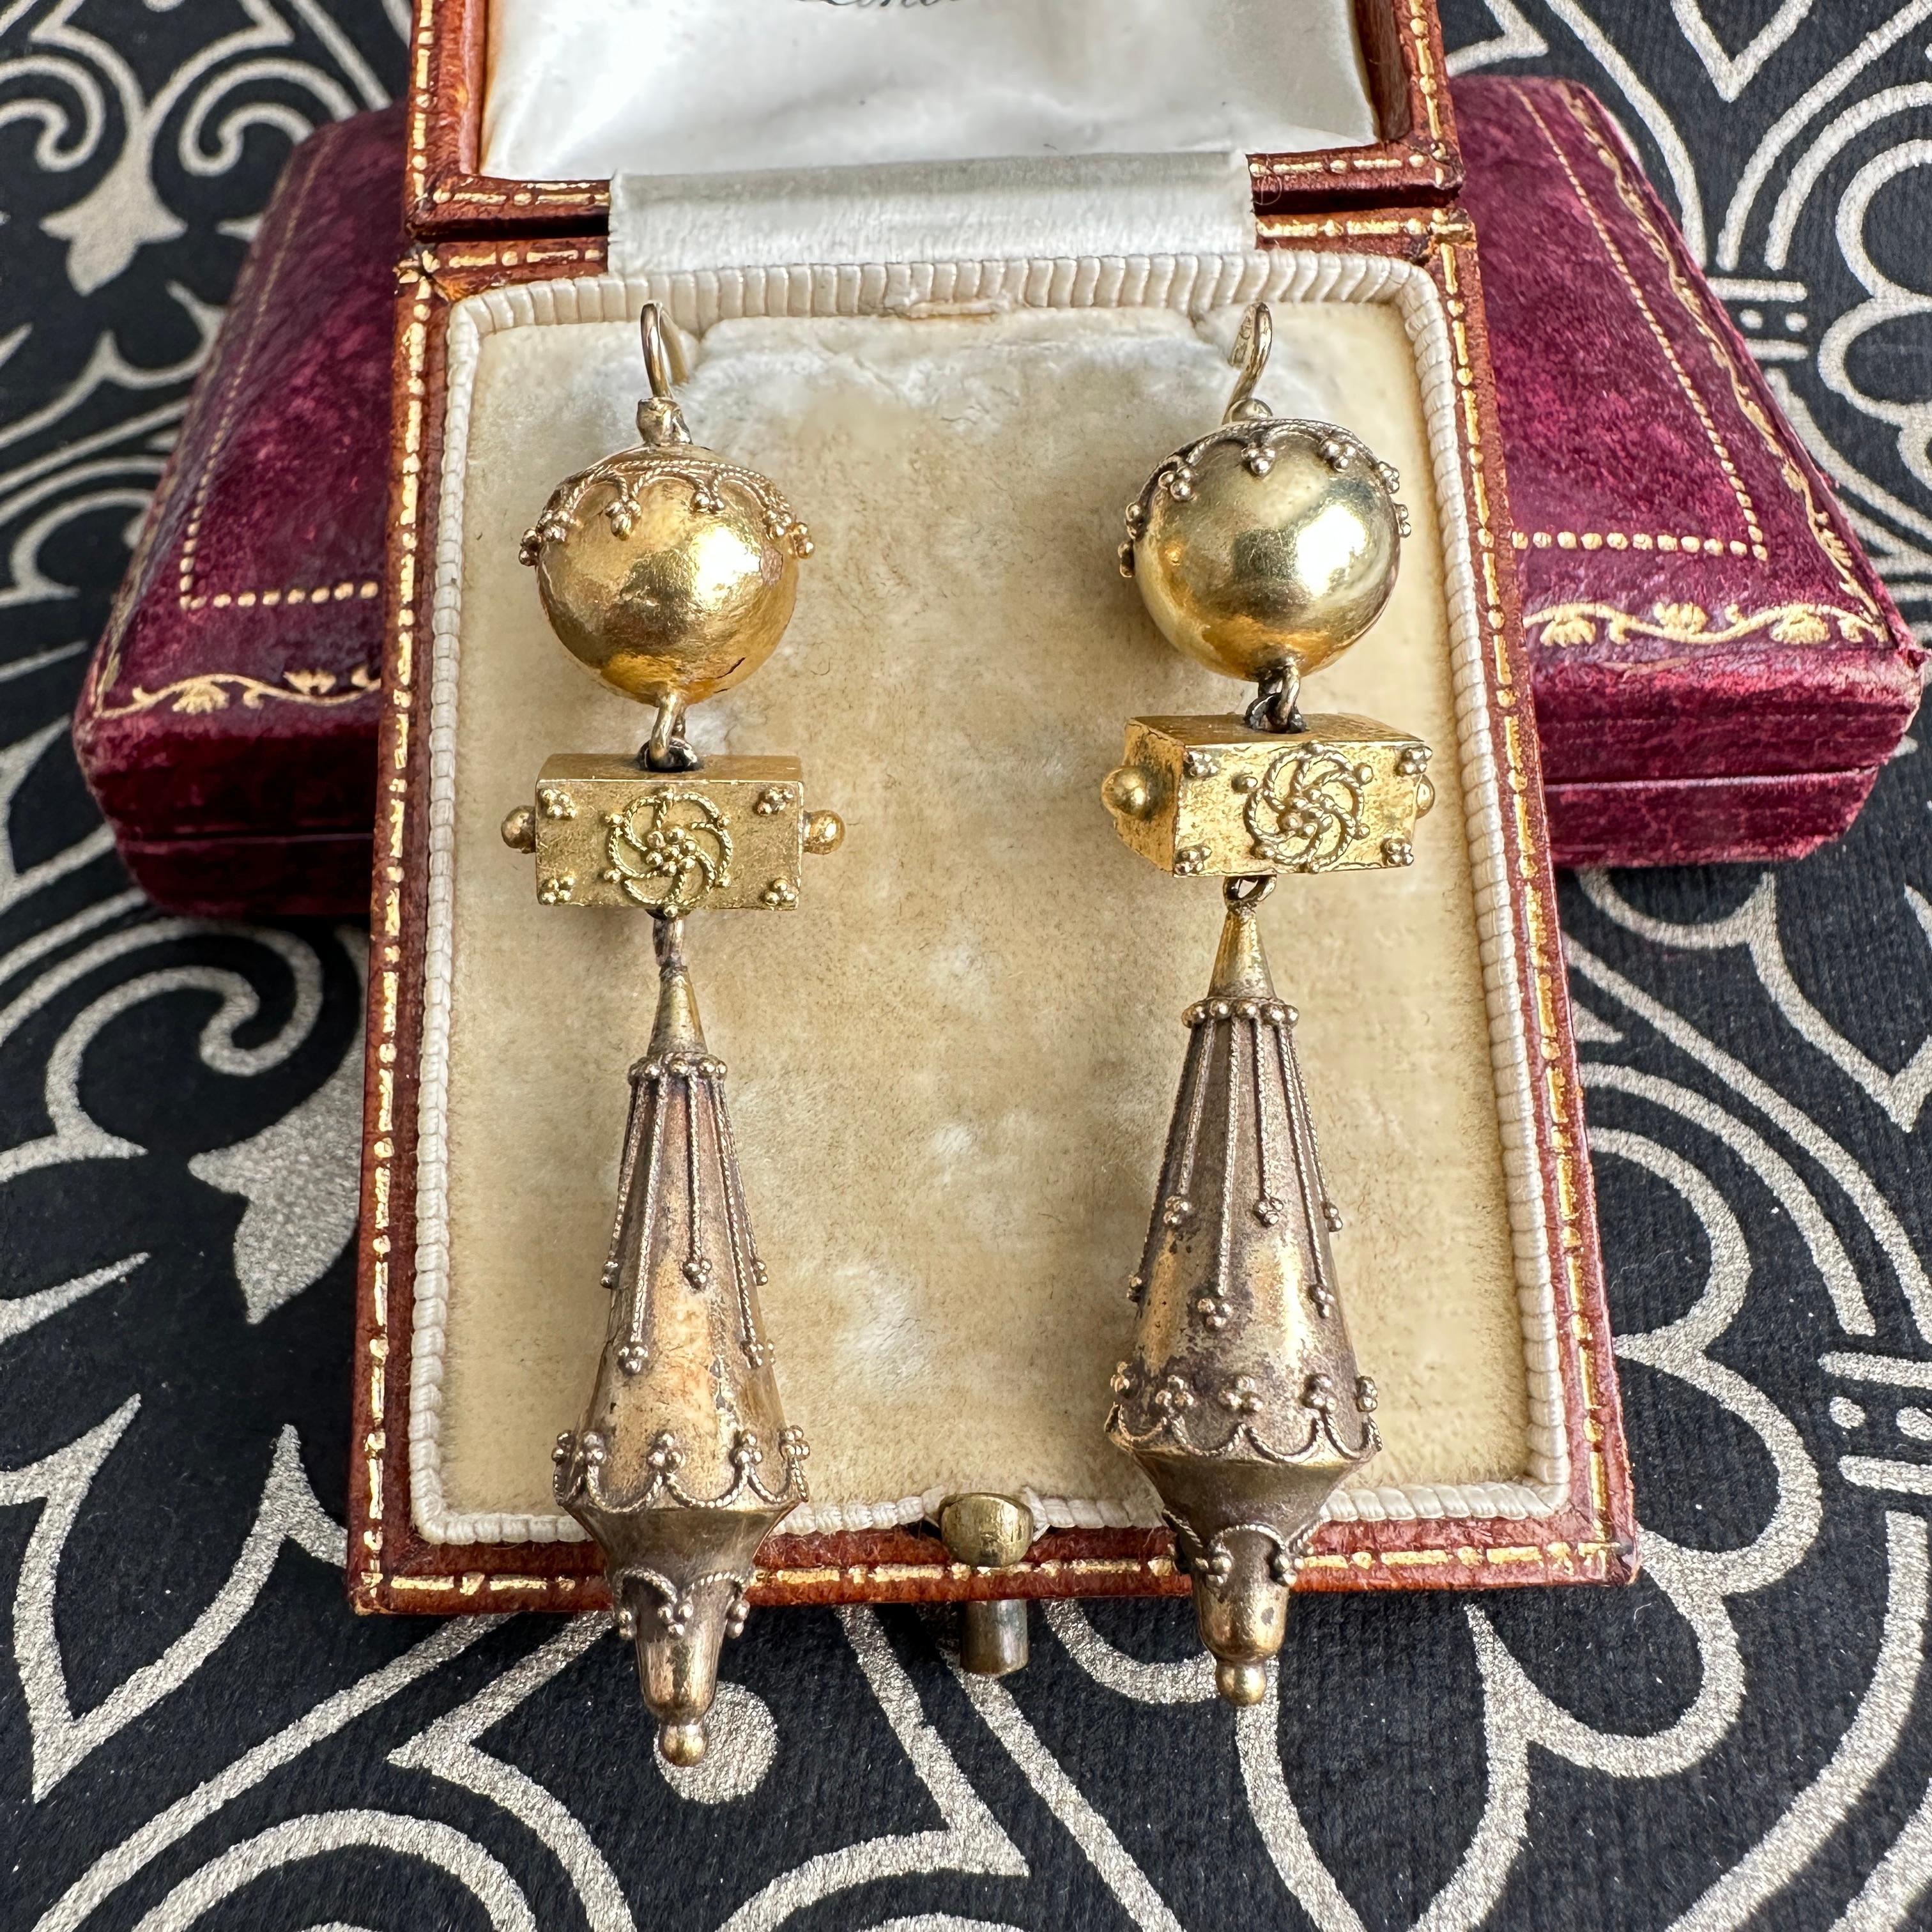 Details:
Not perfect, but Gorgeous pair of Etruscan Victorian 14K and 18K yellow gold earrings. These date to between 1860-1880. The earrings are sweetly decorated with delicate little scallop filigree and dots, and are absolutely magnificent. They